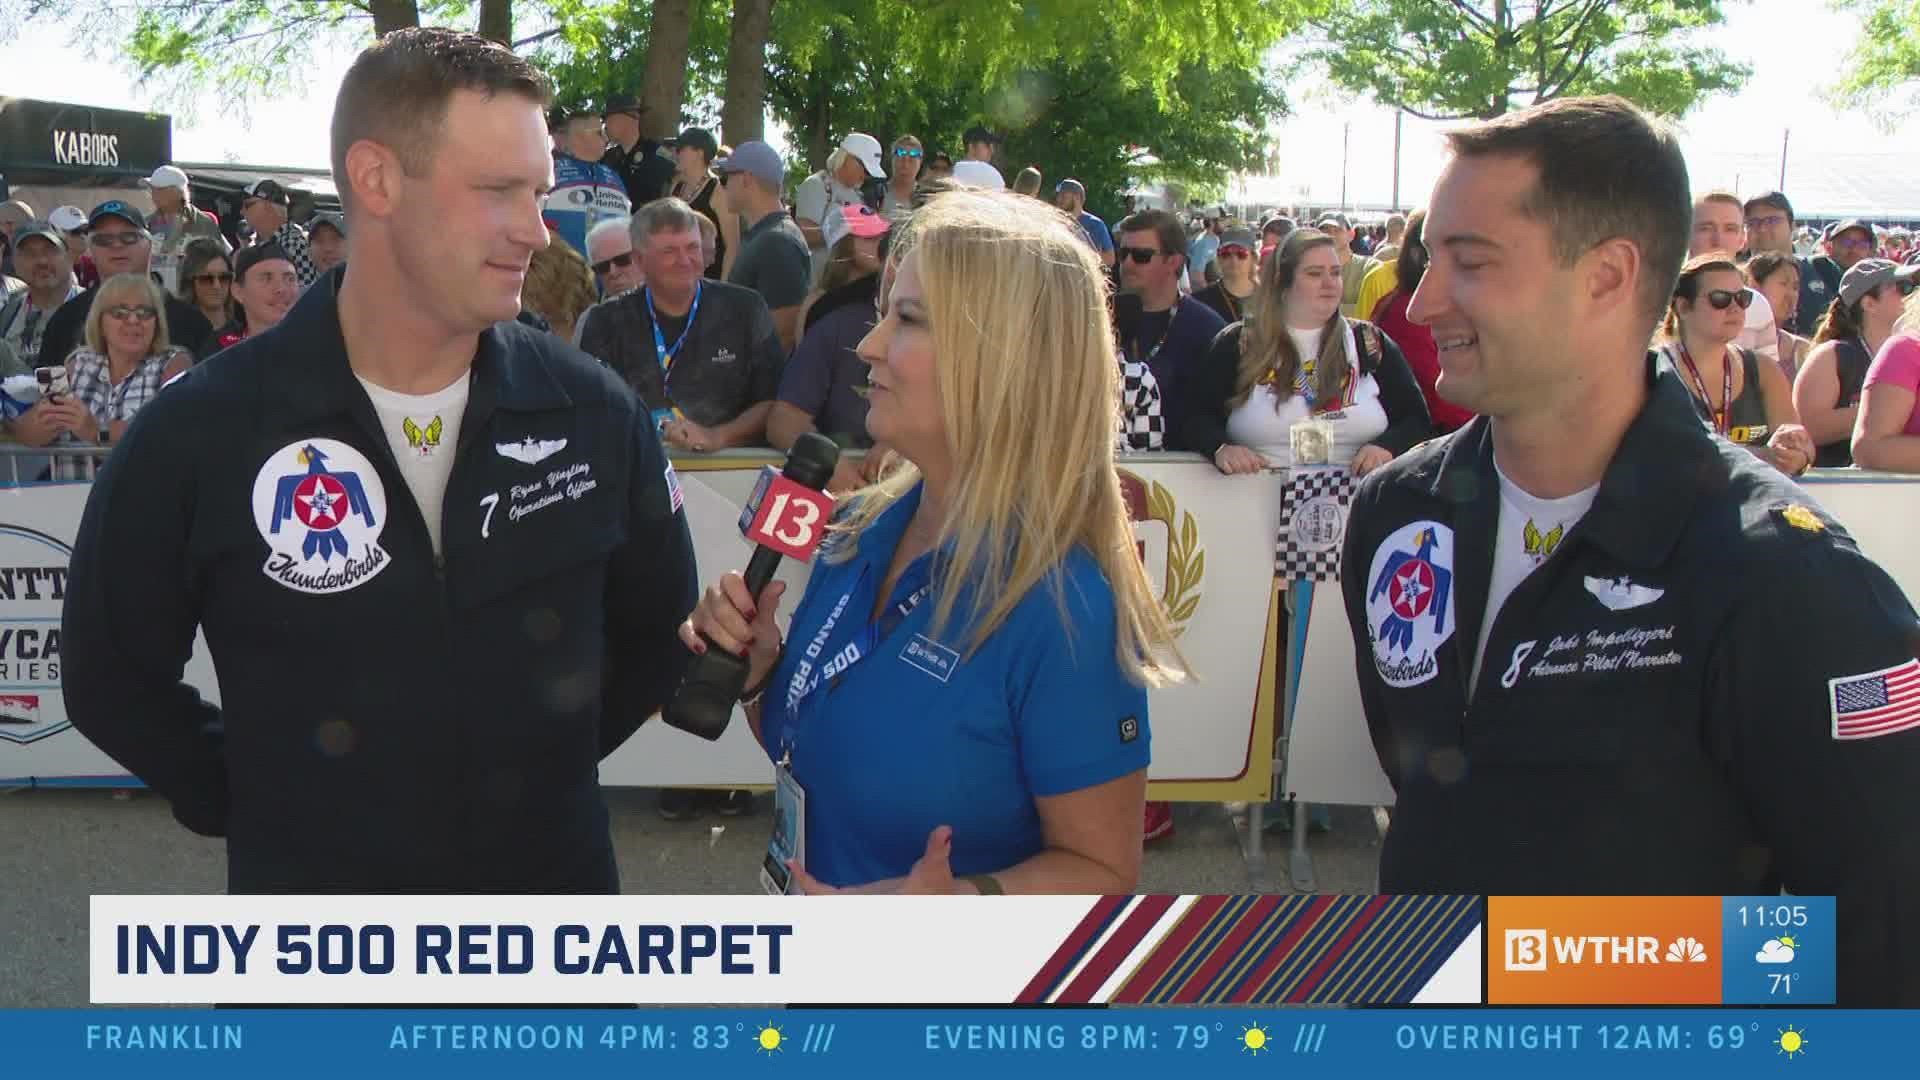 Air Force Thunderbirds visited with Laura Steele on the Red Carpet before their pre-race flyover.